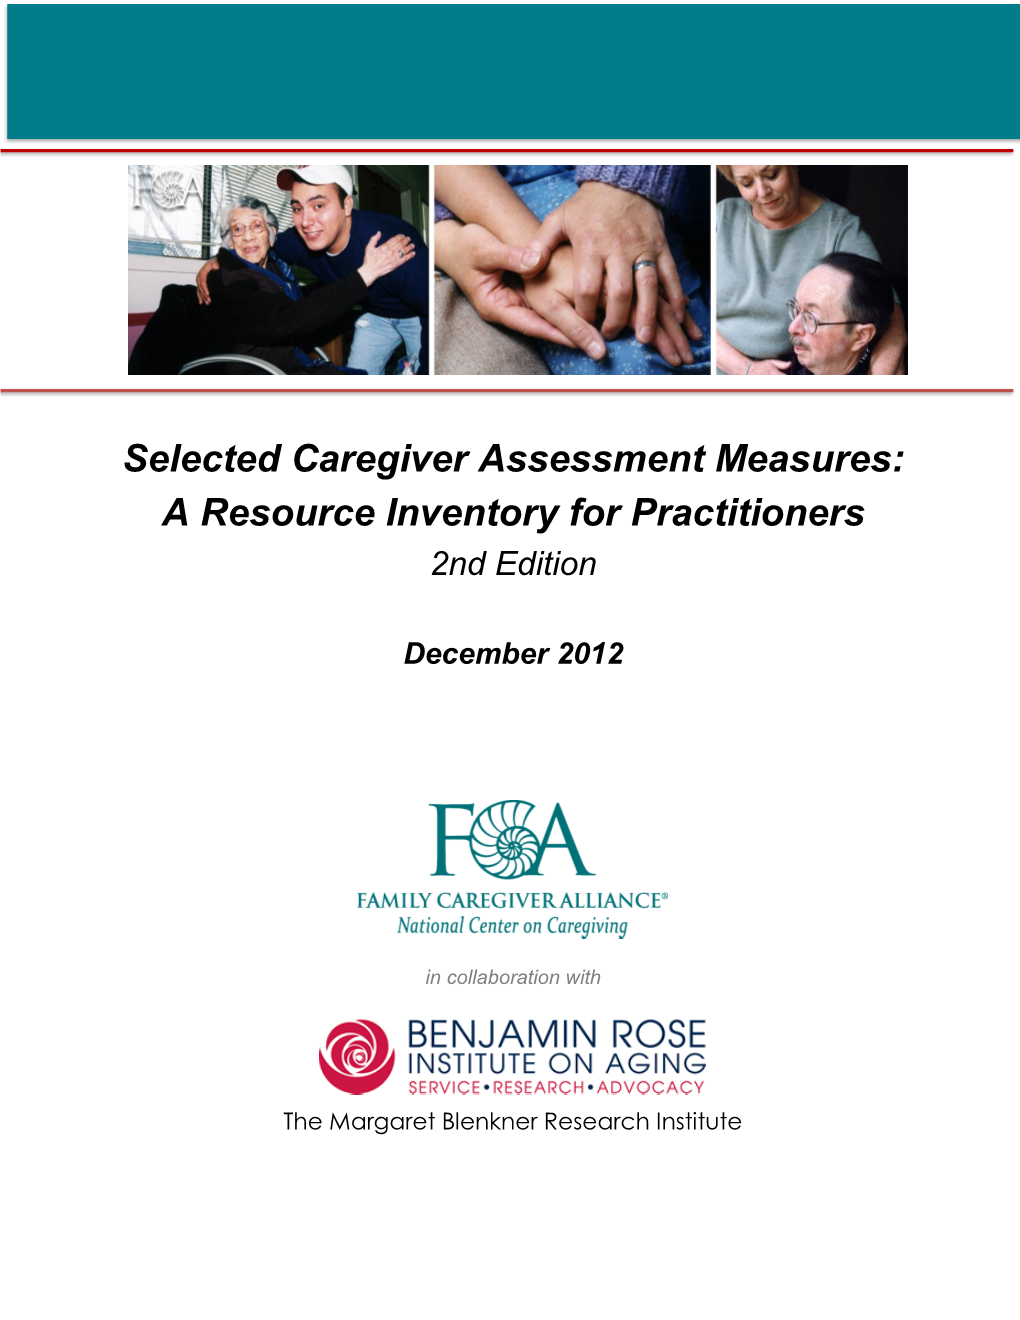 Selected Caregiver Assessment Measures: a Resource Inventory for Practitioners 2Nd Edition